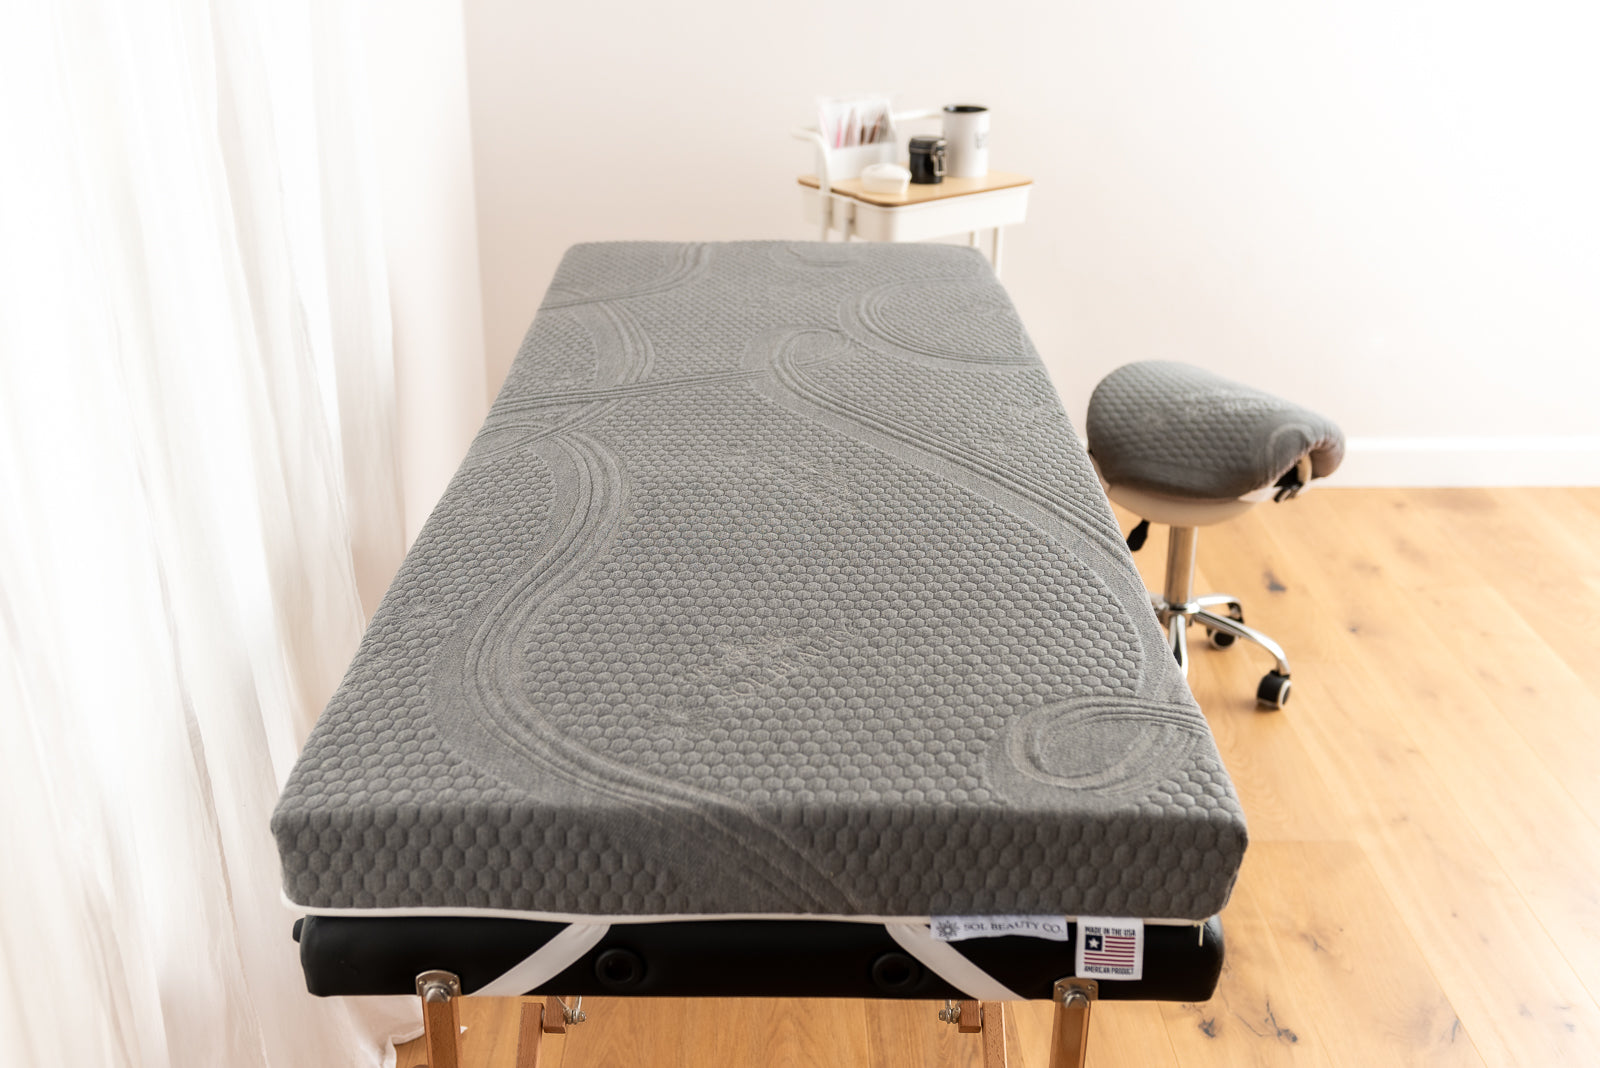 KKCD Square/Round/Trapezoidal Head Lash Bed Topper,Massage Table Mattress  Topper with Face Breath Hole,Non-Slip Spa Bed Padding Without Bed,for  Beauty